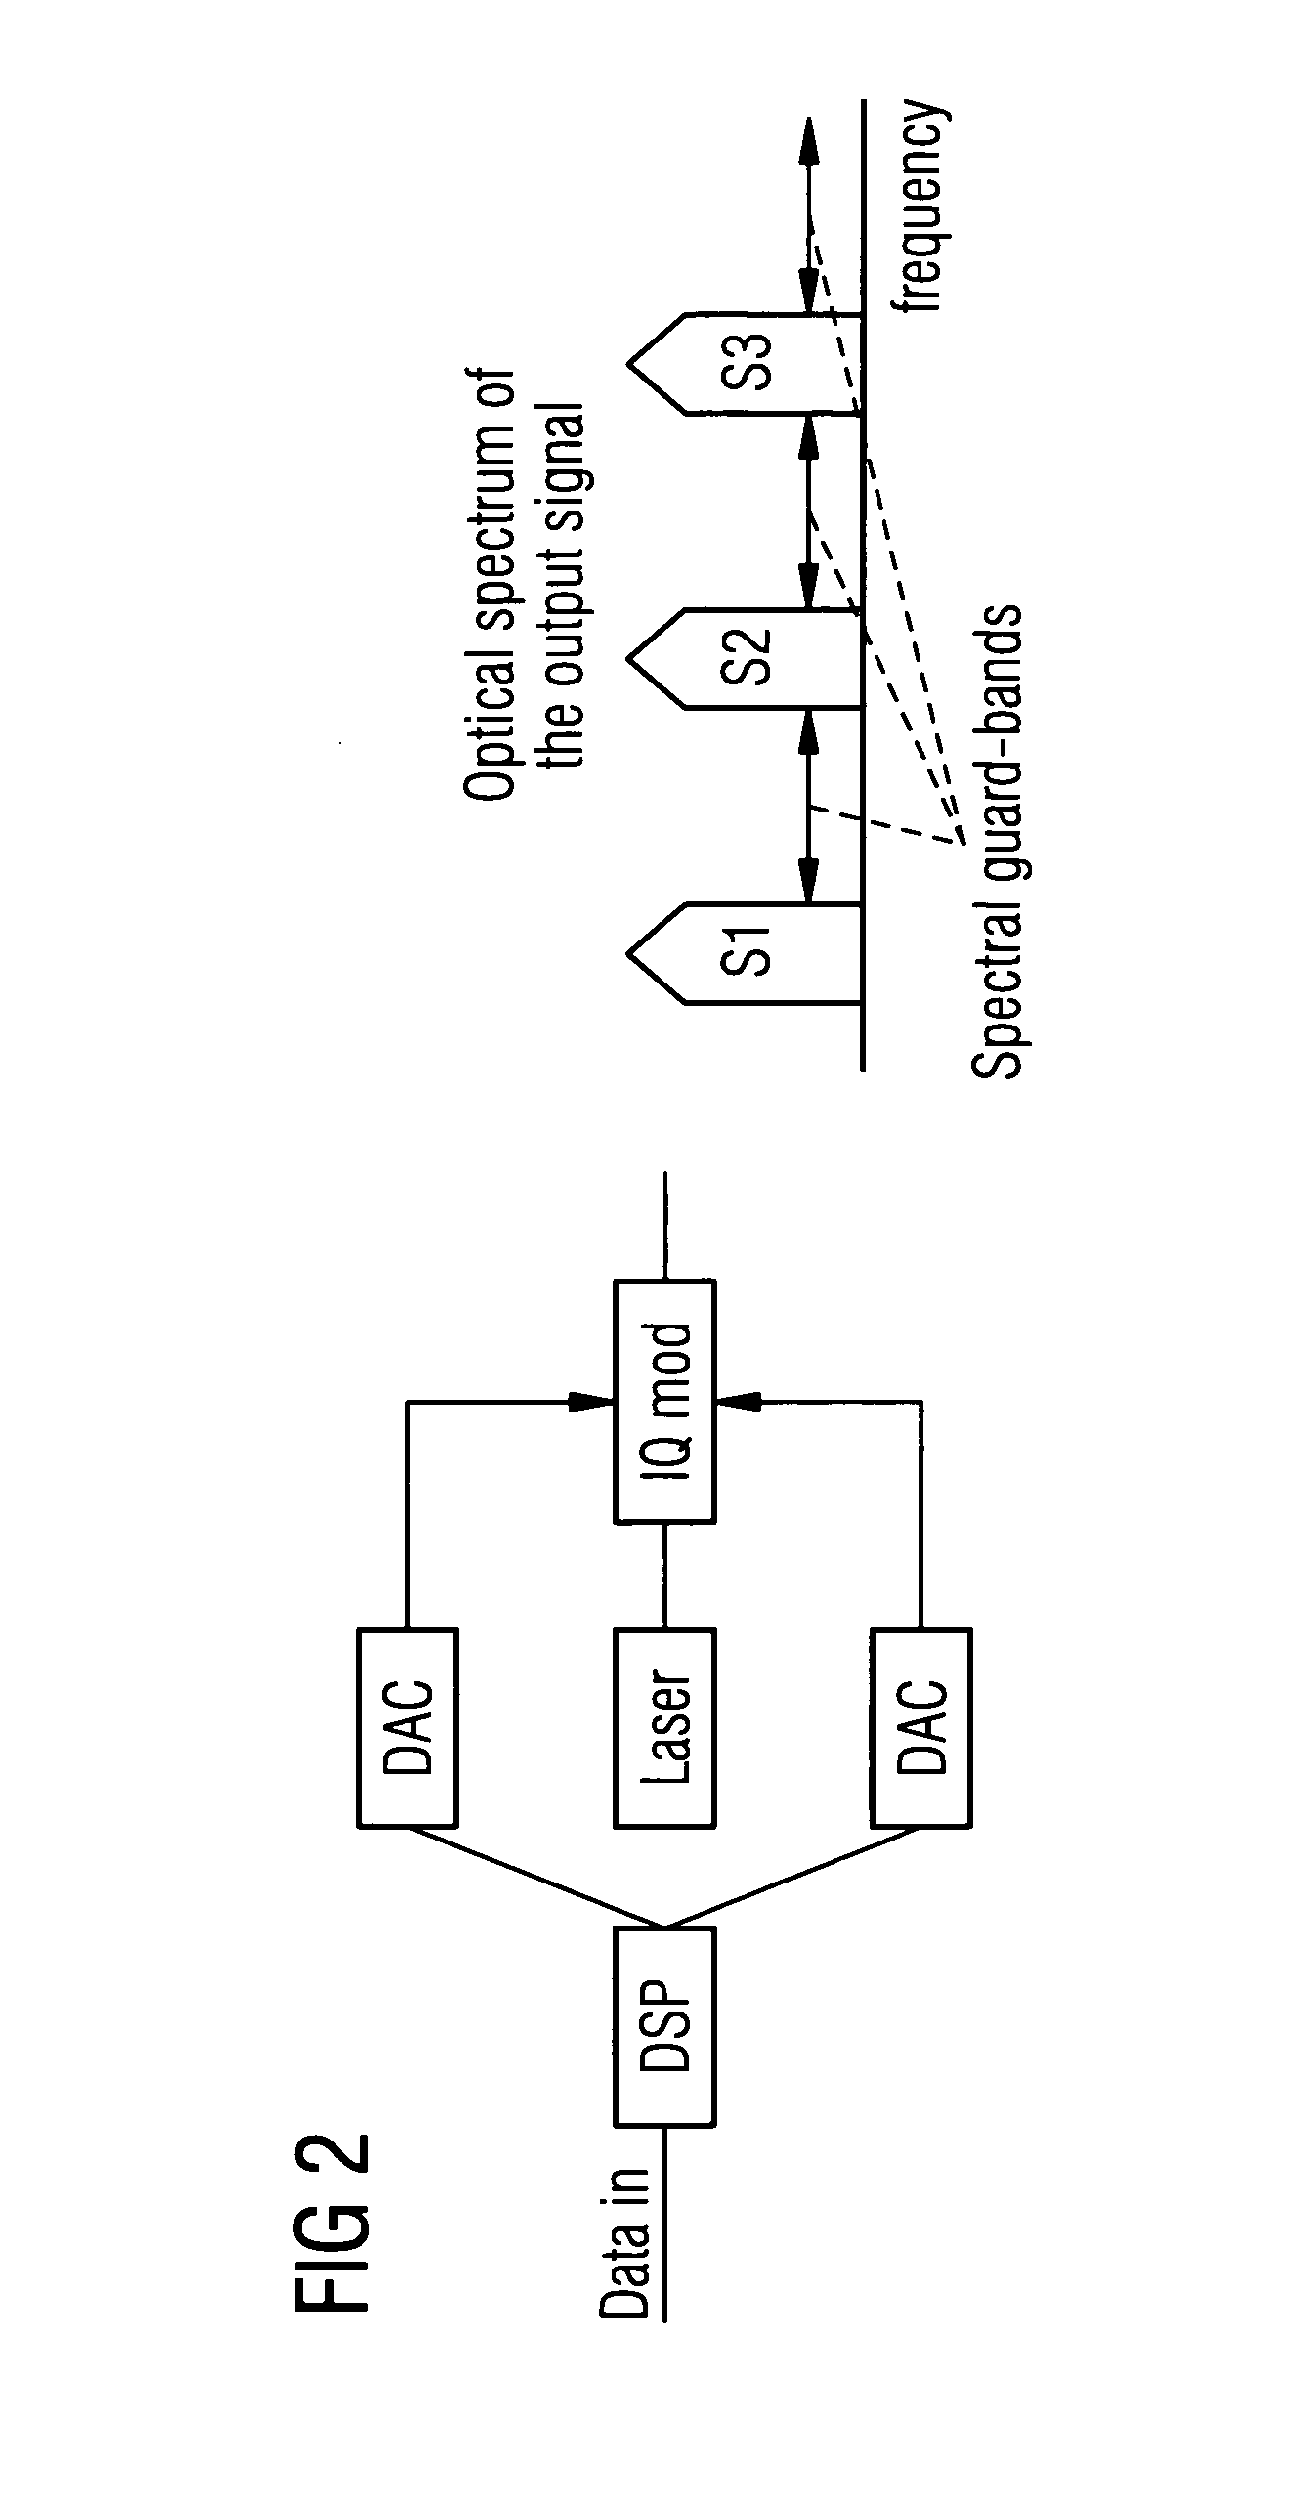 Optical line terminal transmitting device for next generation optical access networks